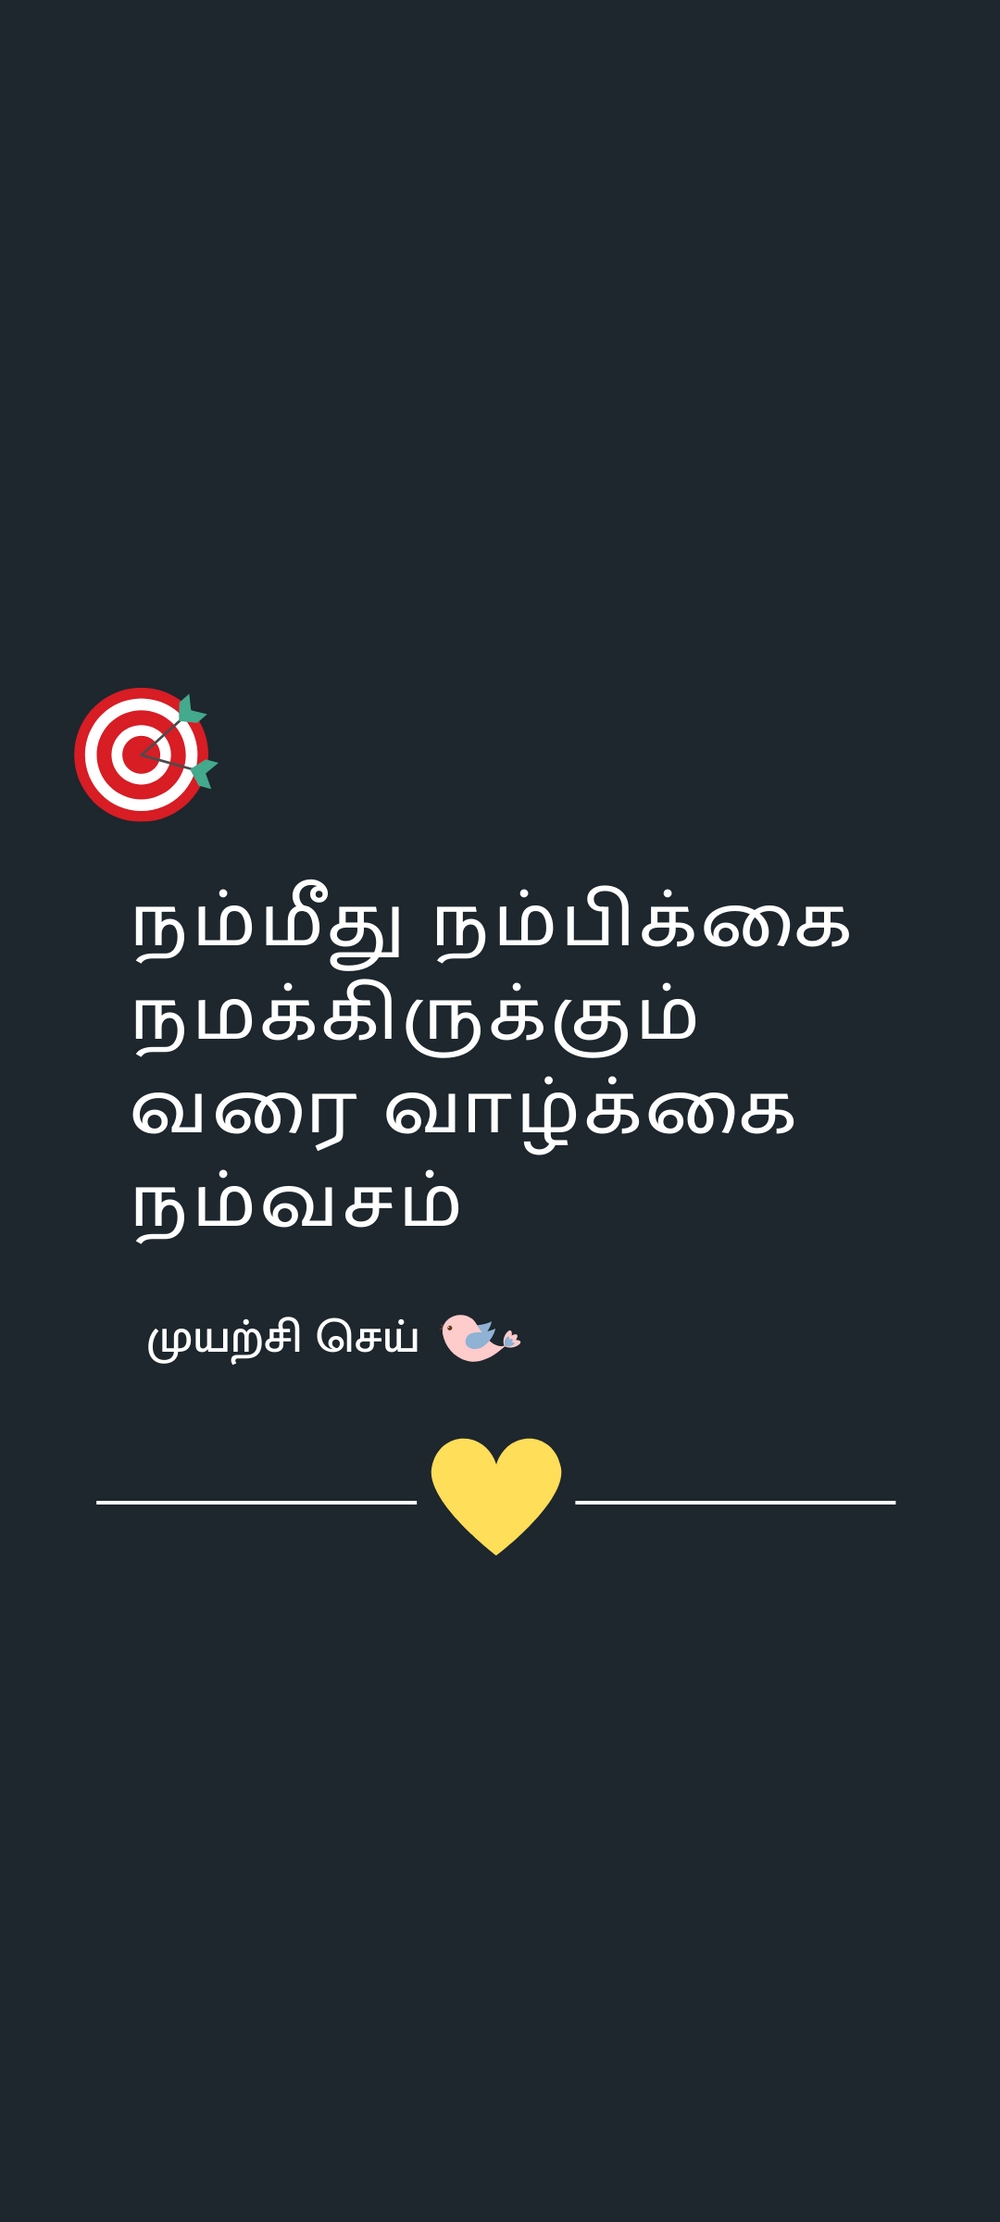 Quotes and Kavithai Mobile Wallpapers